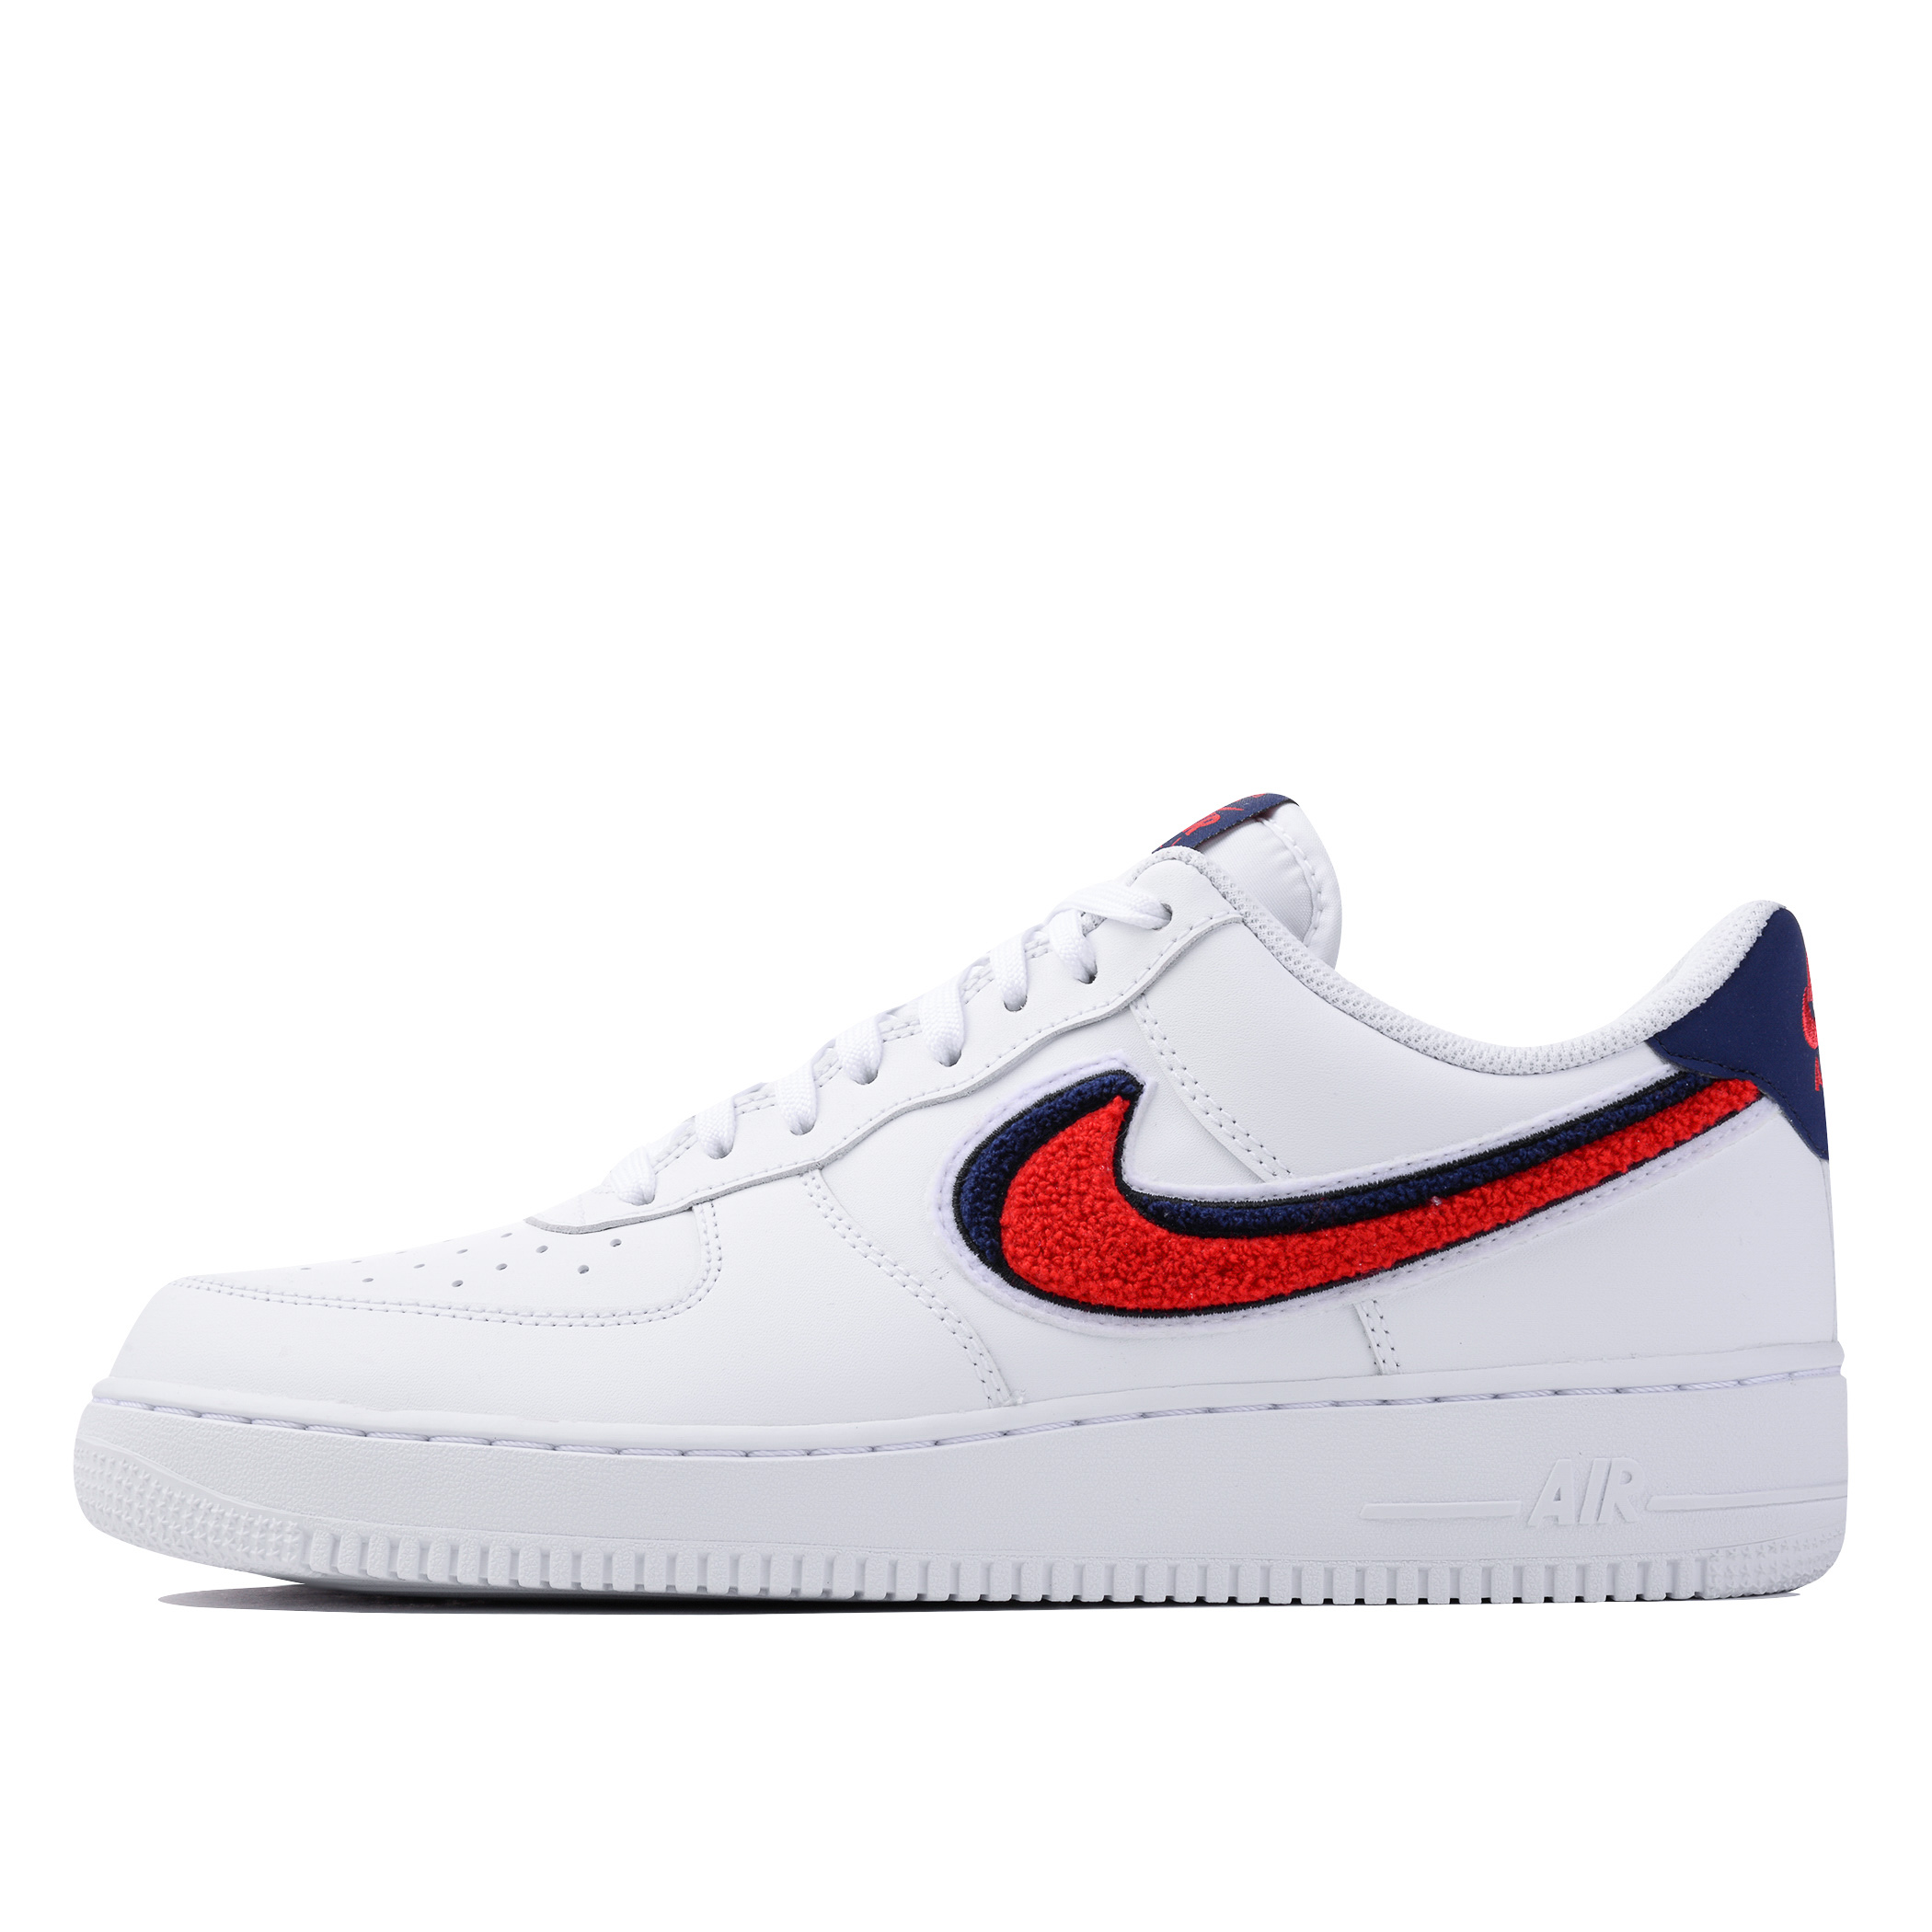 nike air force 1 07 lv8 university red